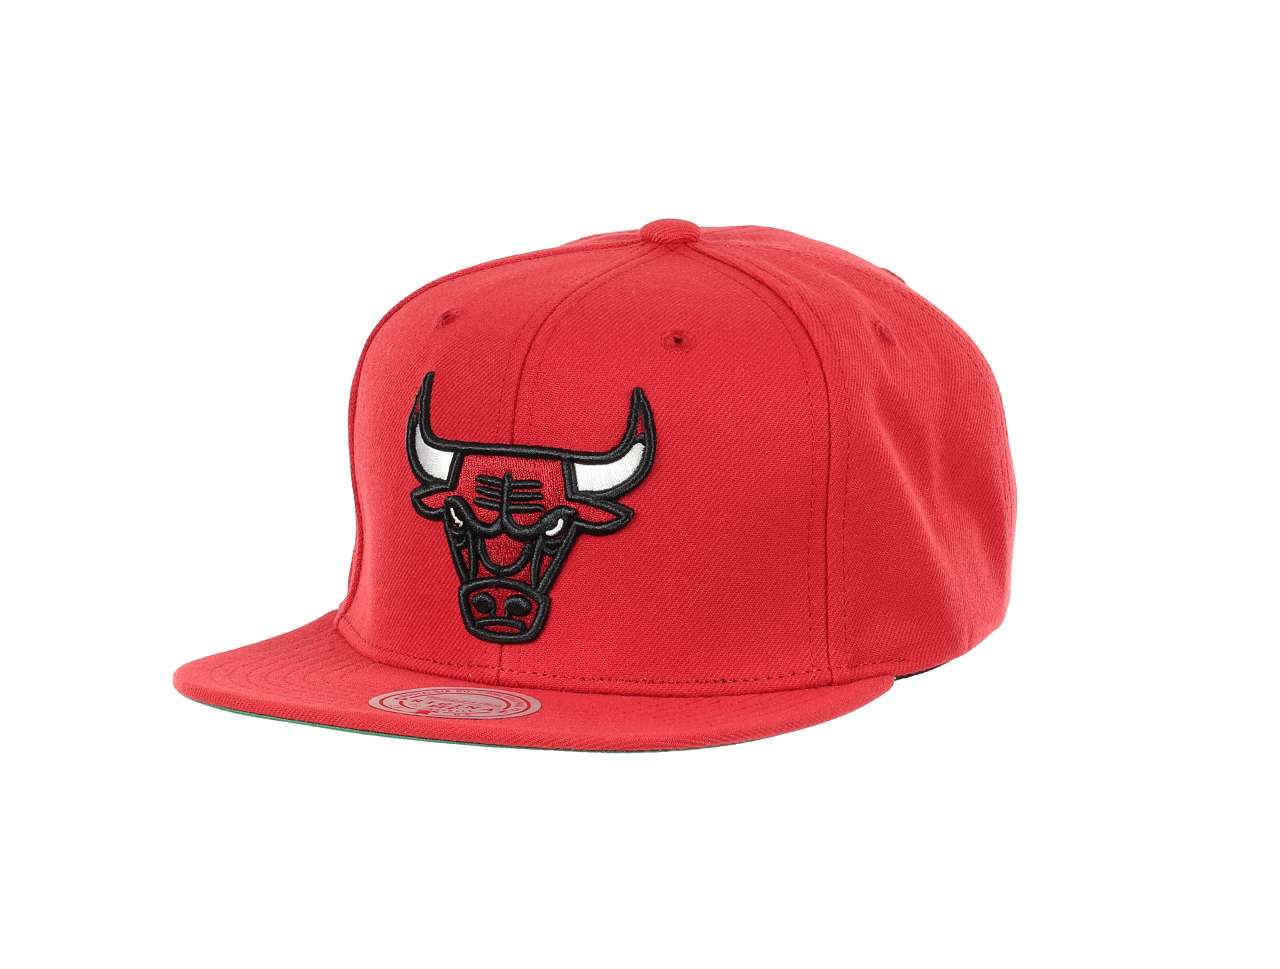 Chicago Bulls NBA Conference Patch Red Original Fit Snapback Cap Mitchell & Ness